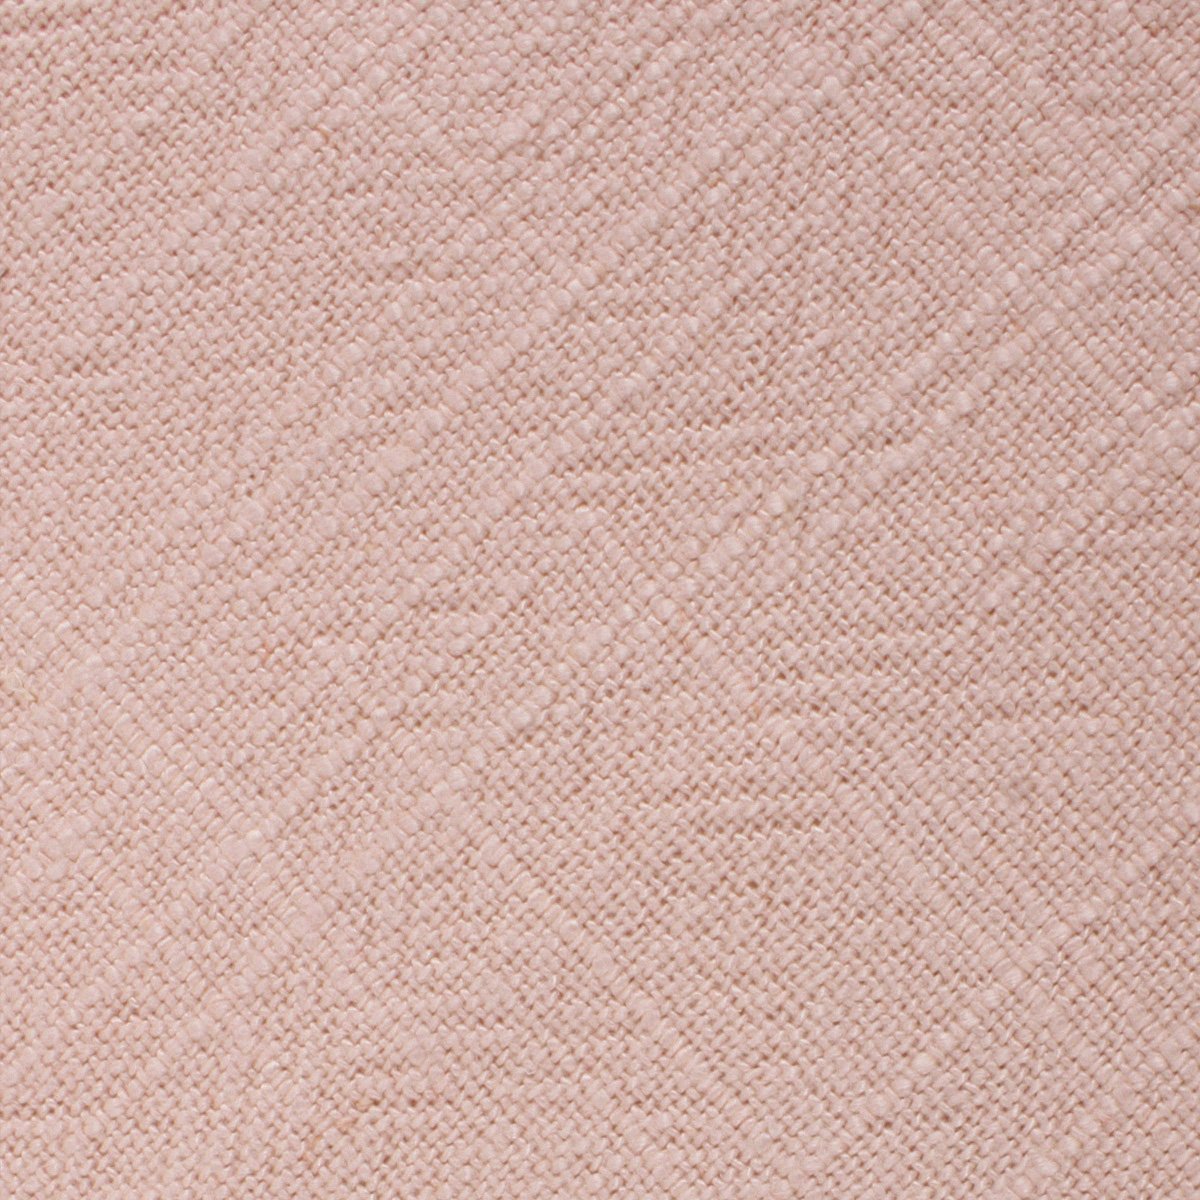 Cameo Beige Pink Chenille Linen Skinny Tie Fabric